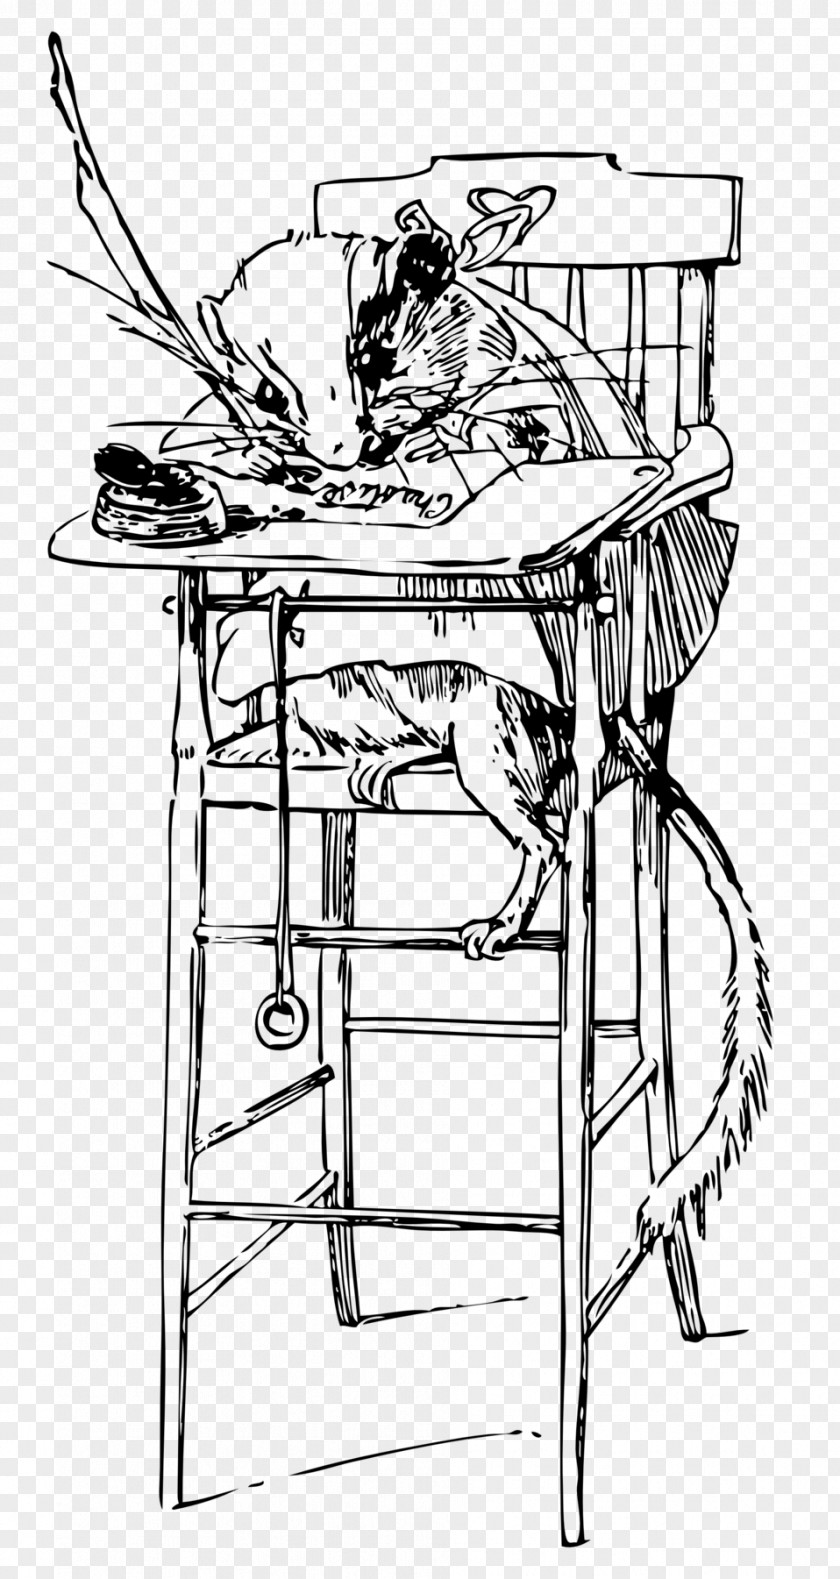 The Cat Sitting On Chair Clip Art PNG